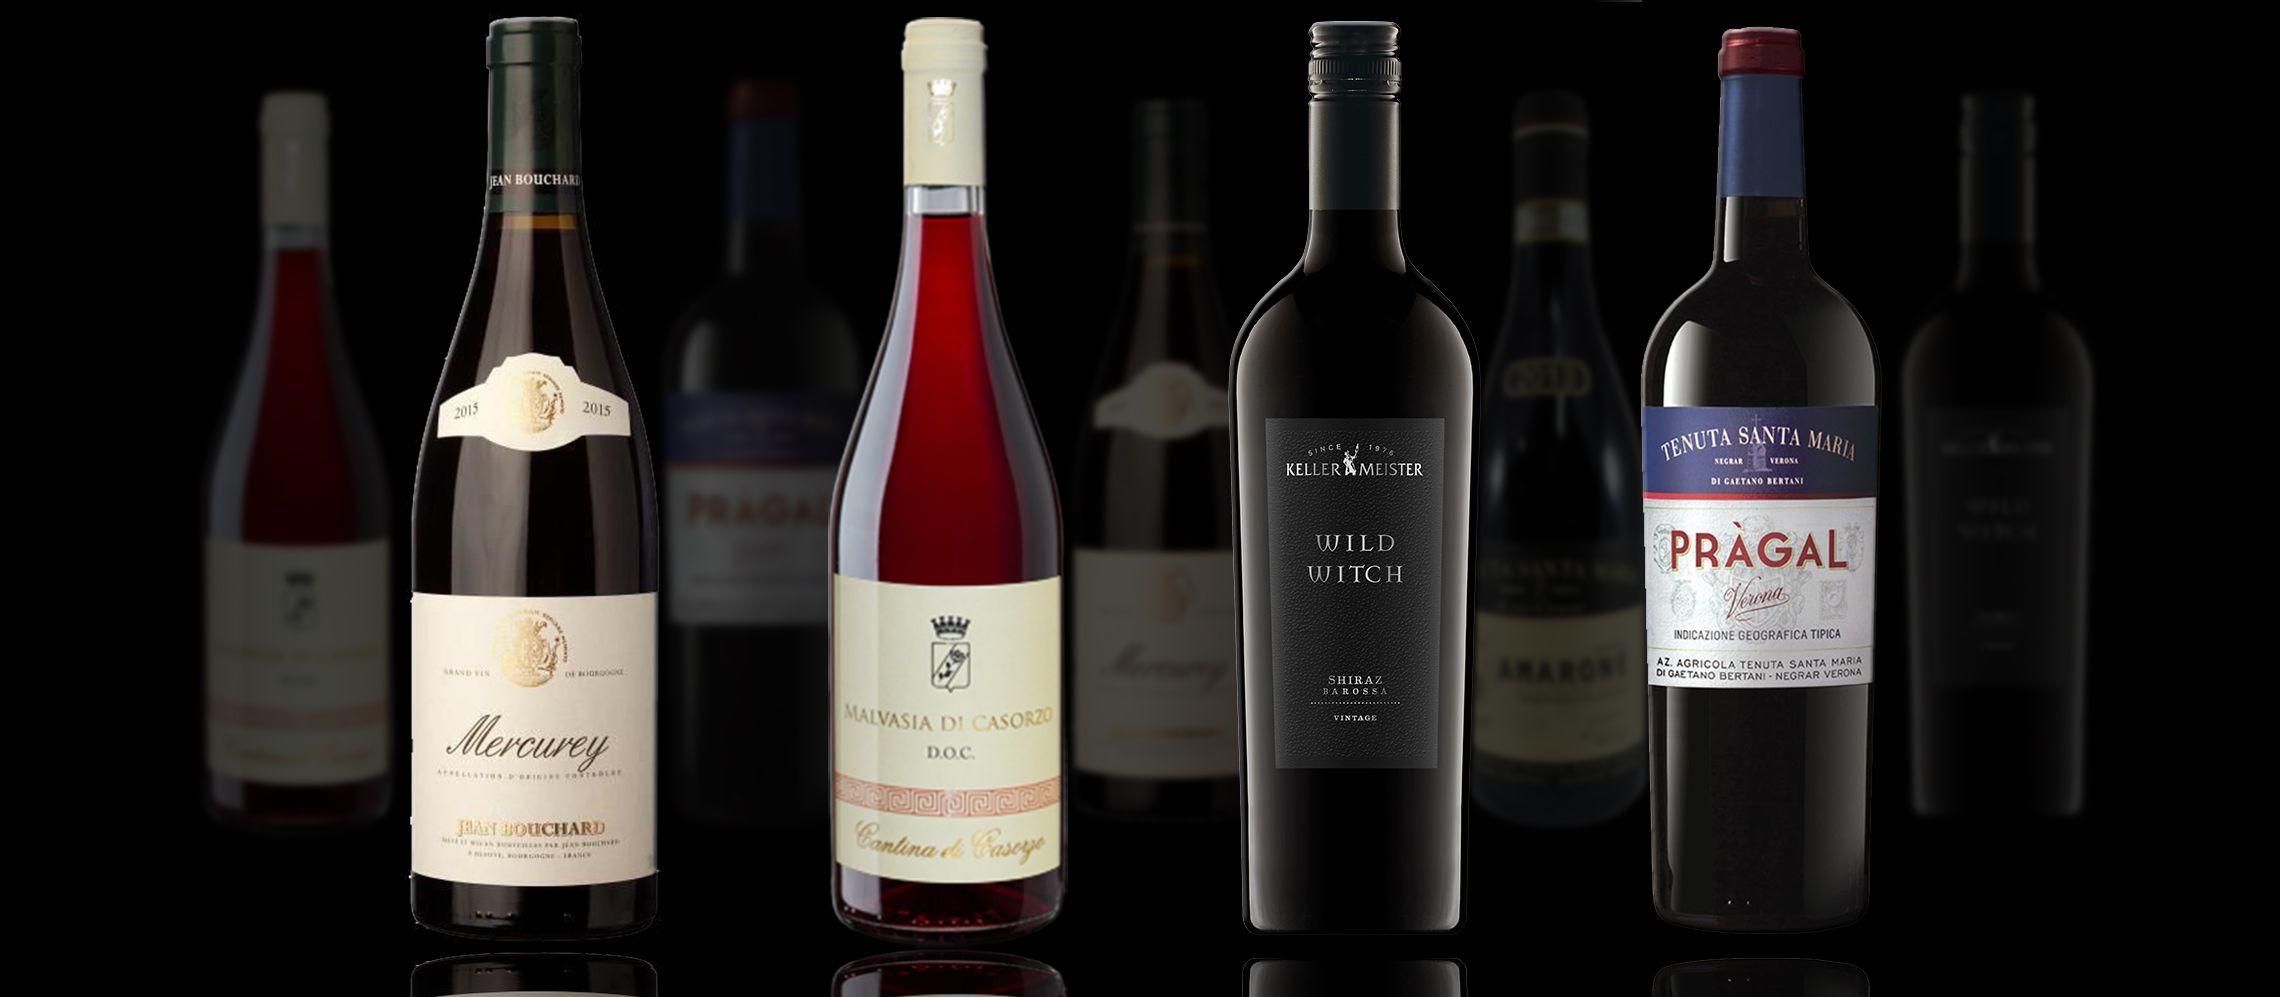 Photo for: 5 Best Wines to Spice Up Your Halloween Plan